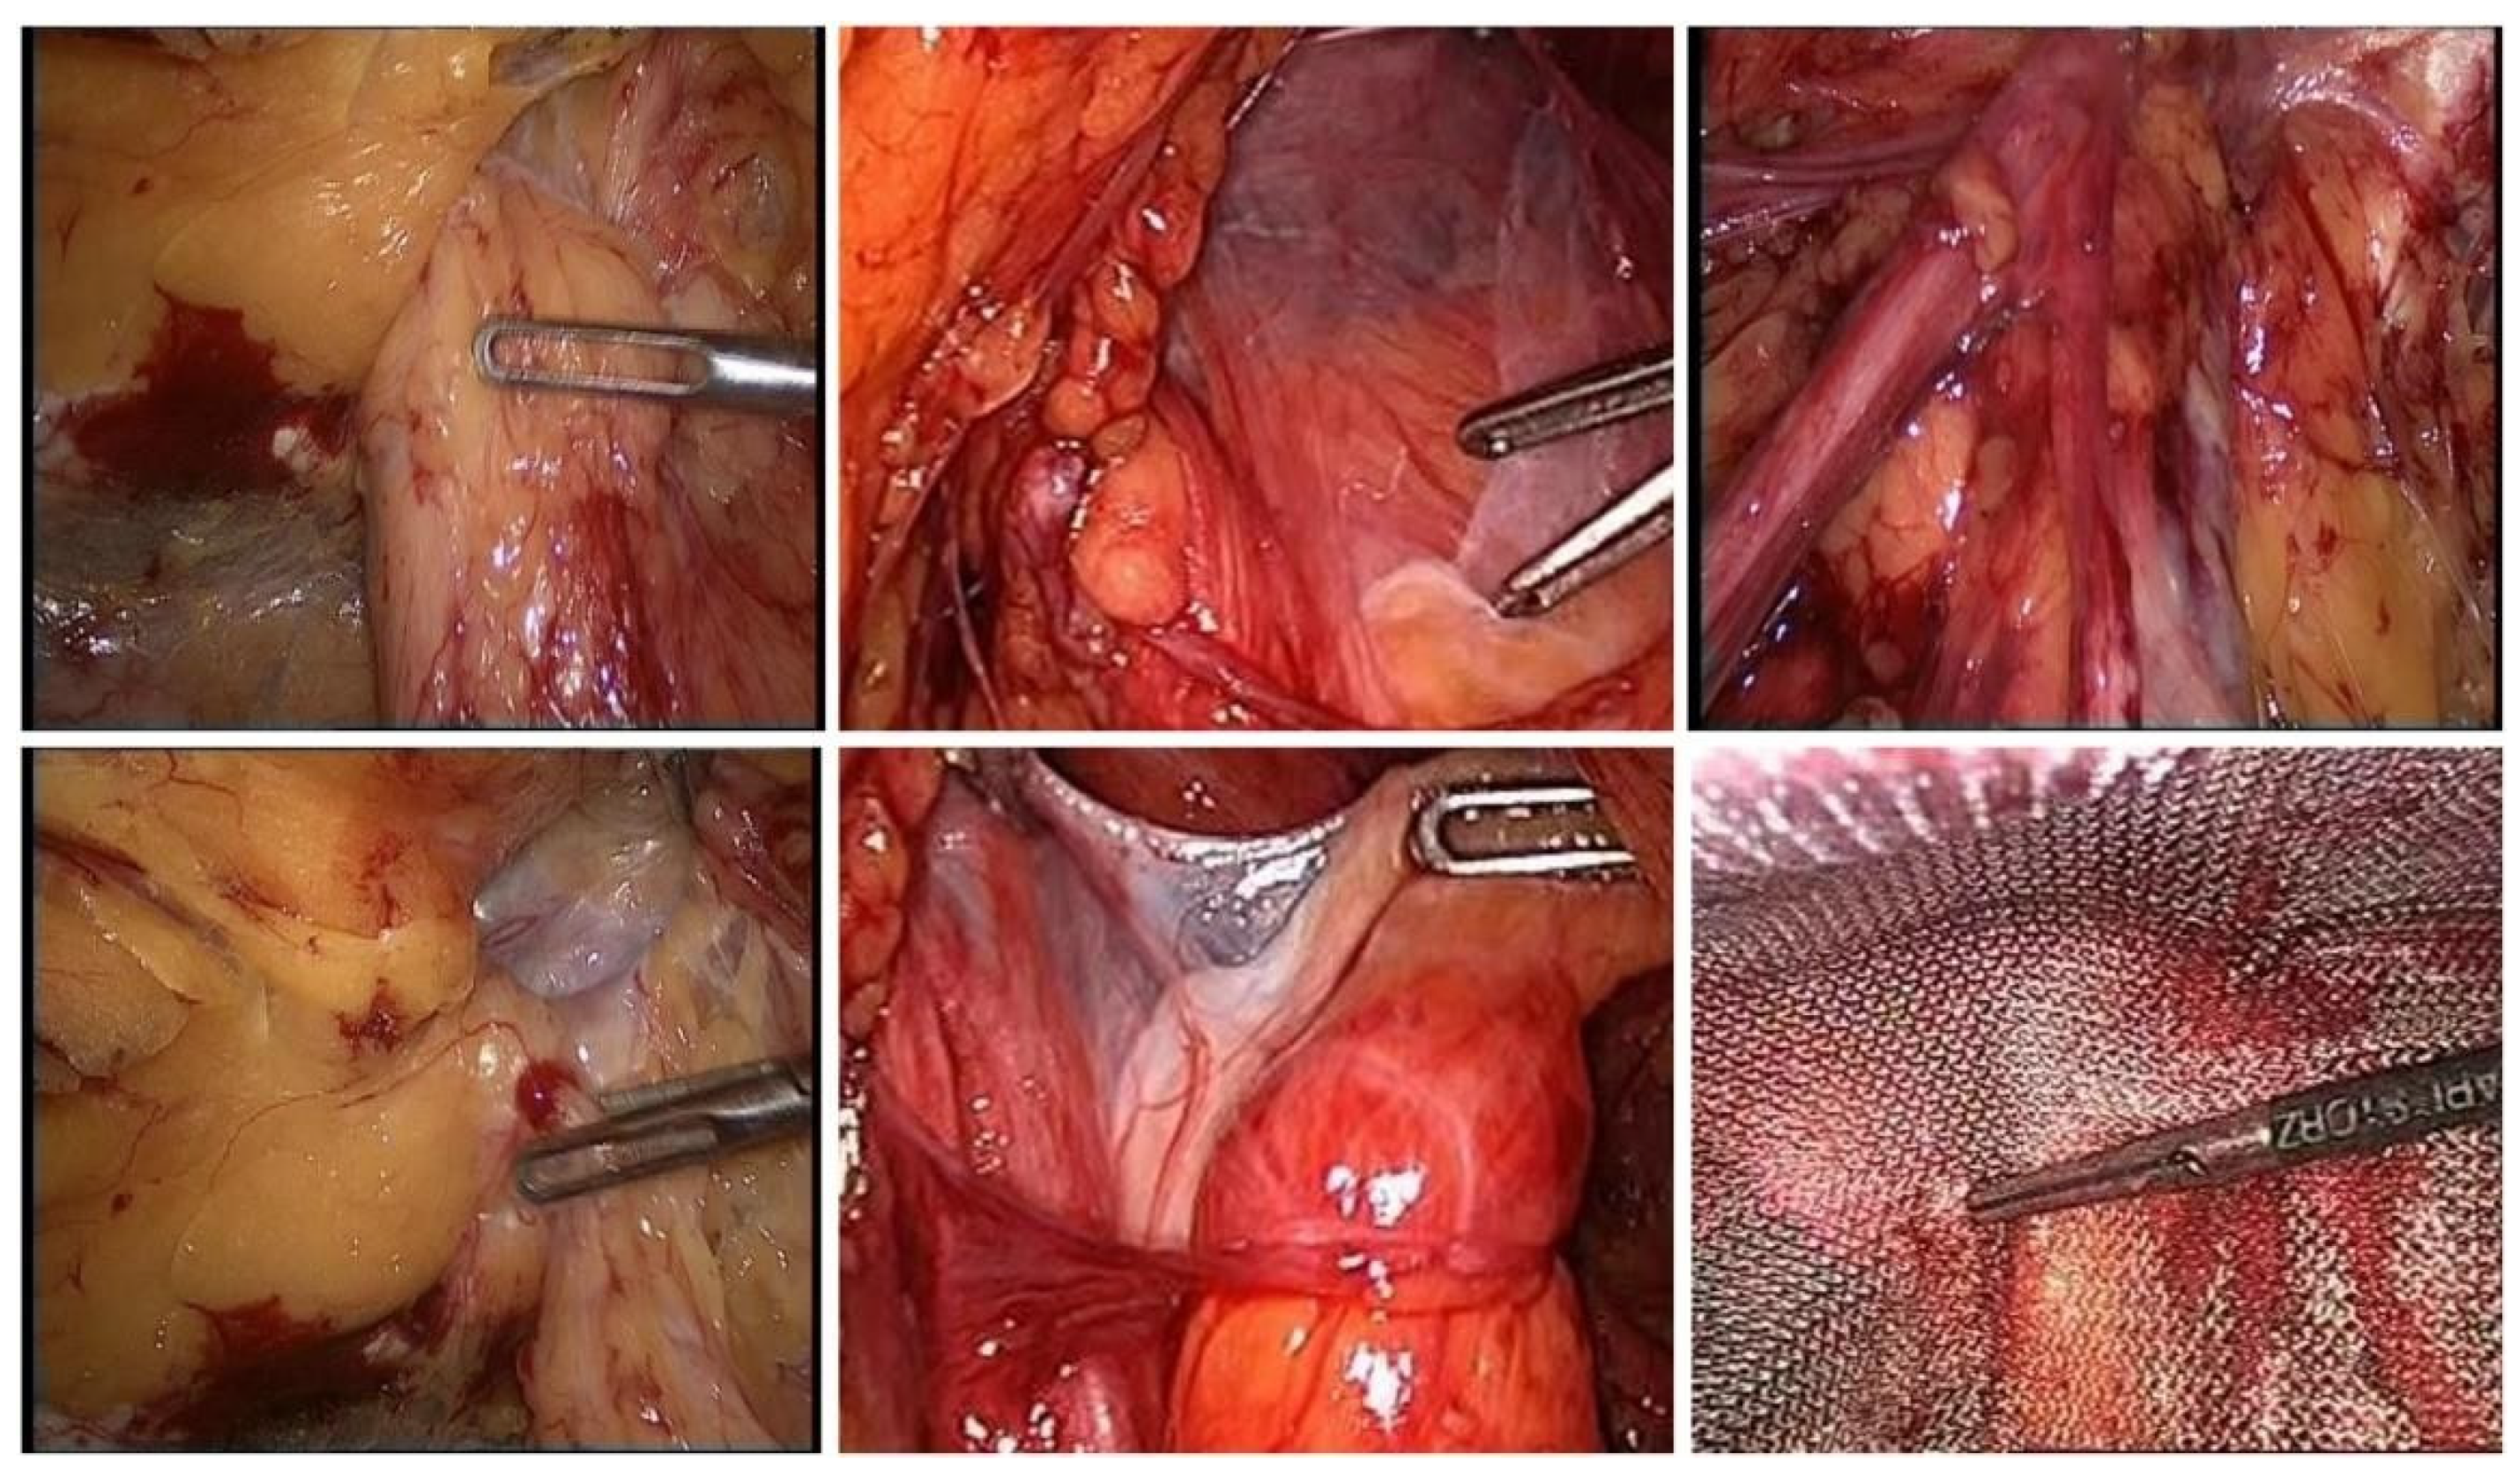 Femoral Hernia (CONTINUED): Surgical Repair of Femoral Hernia